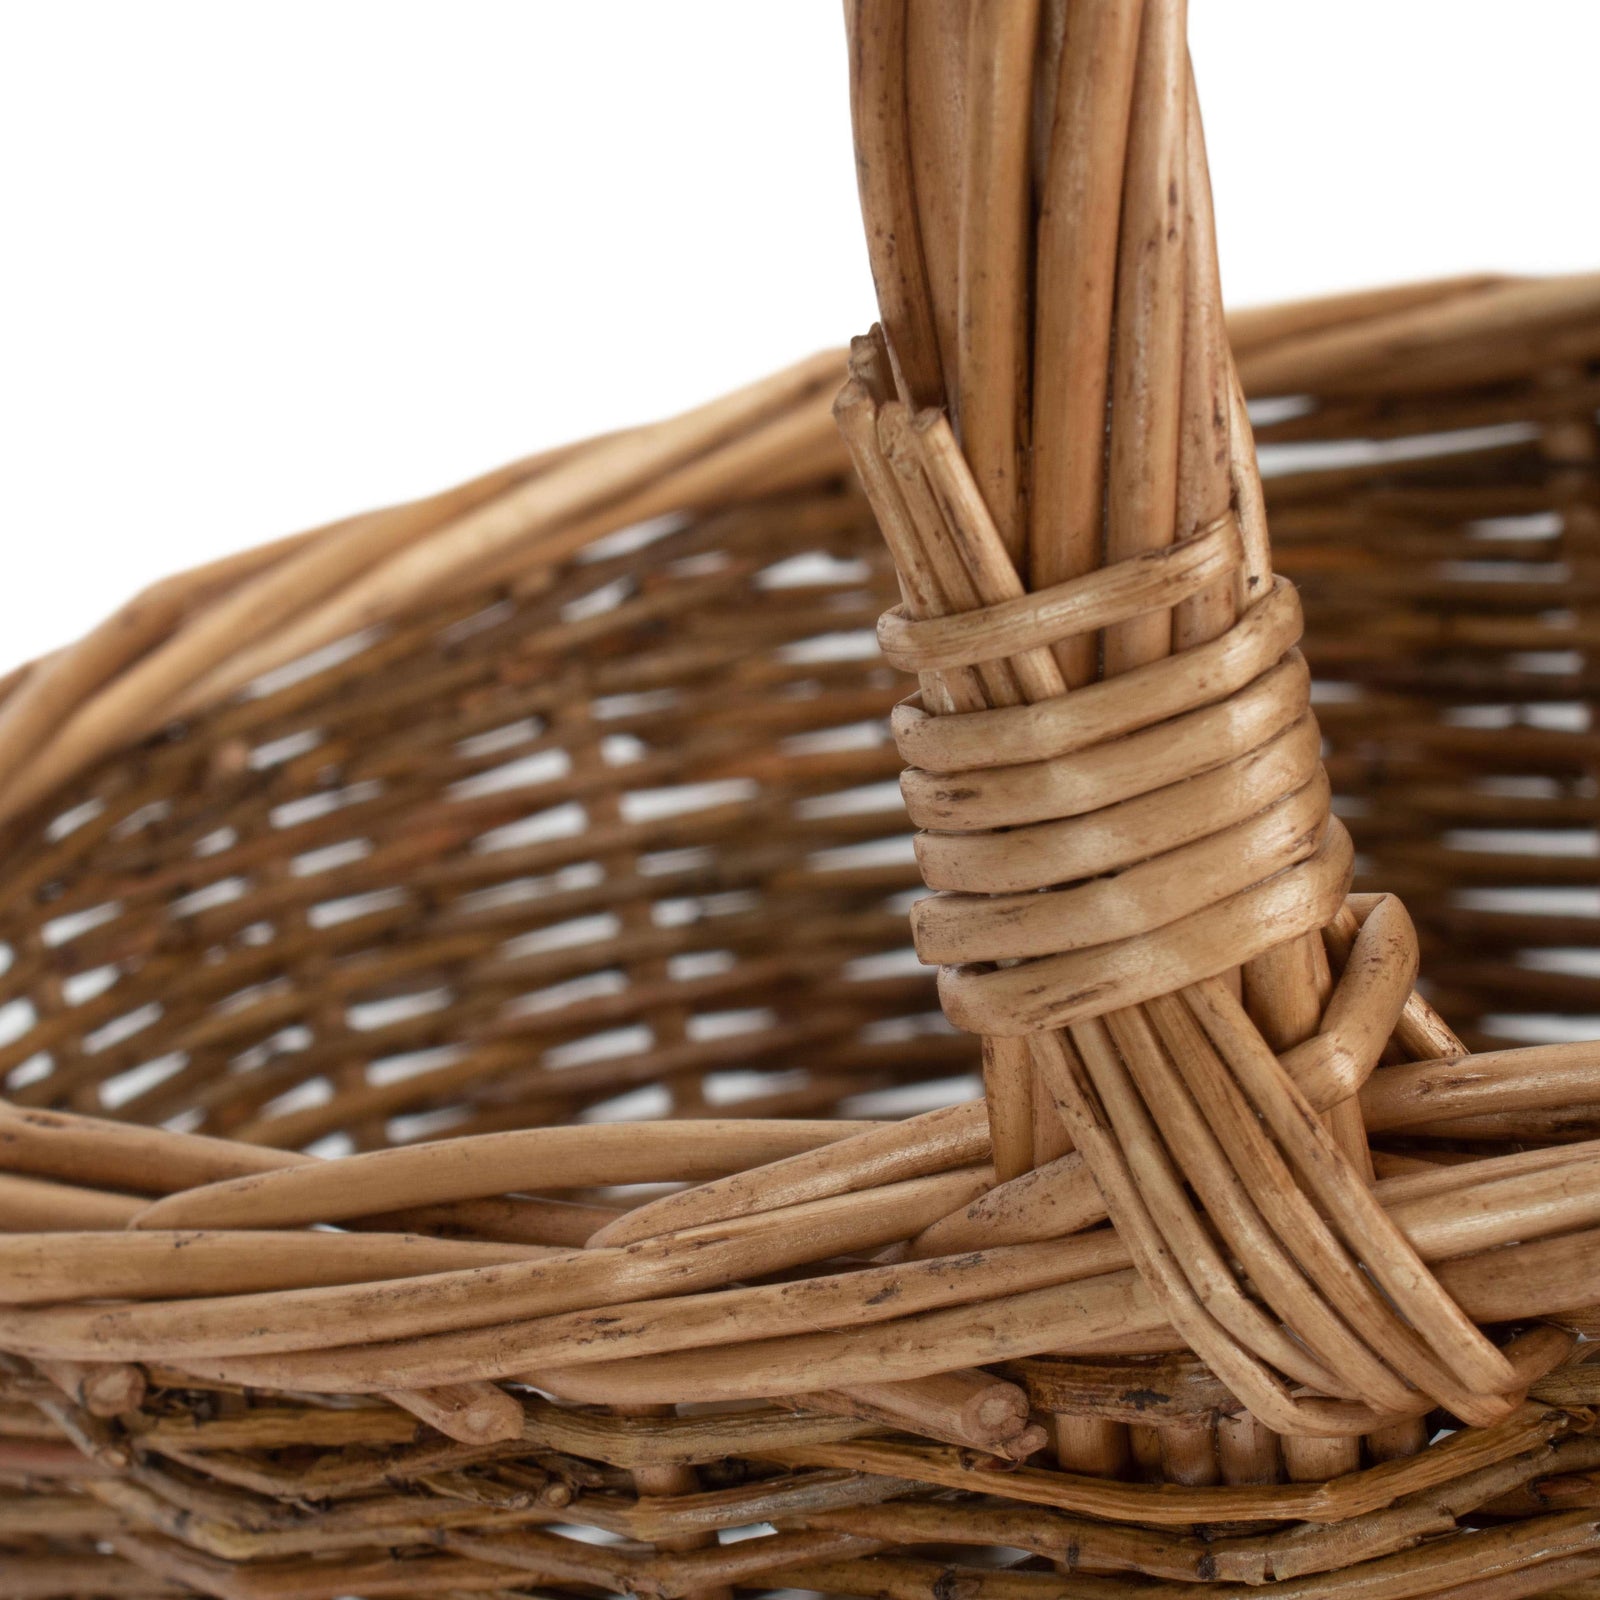 Red Hamper Country Oval Wicker Shopping Basket